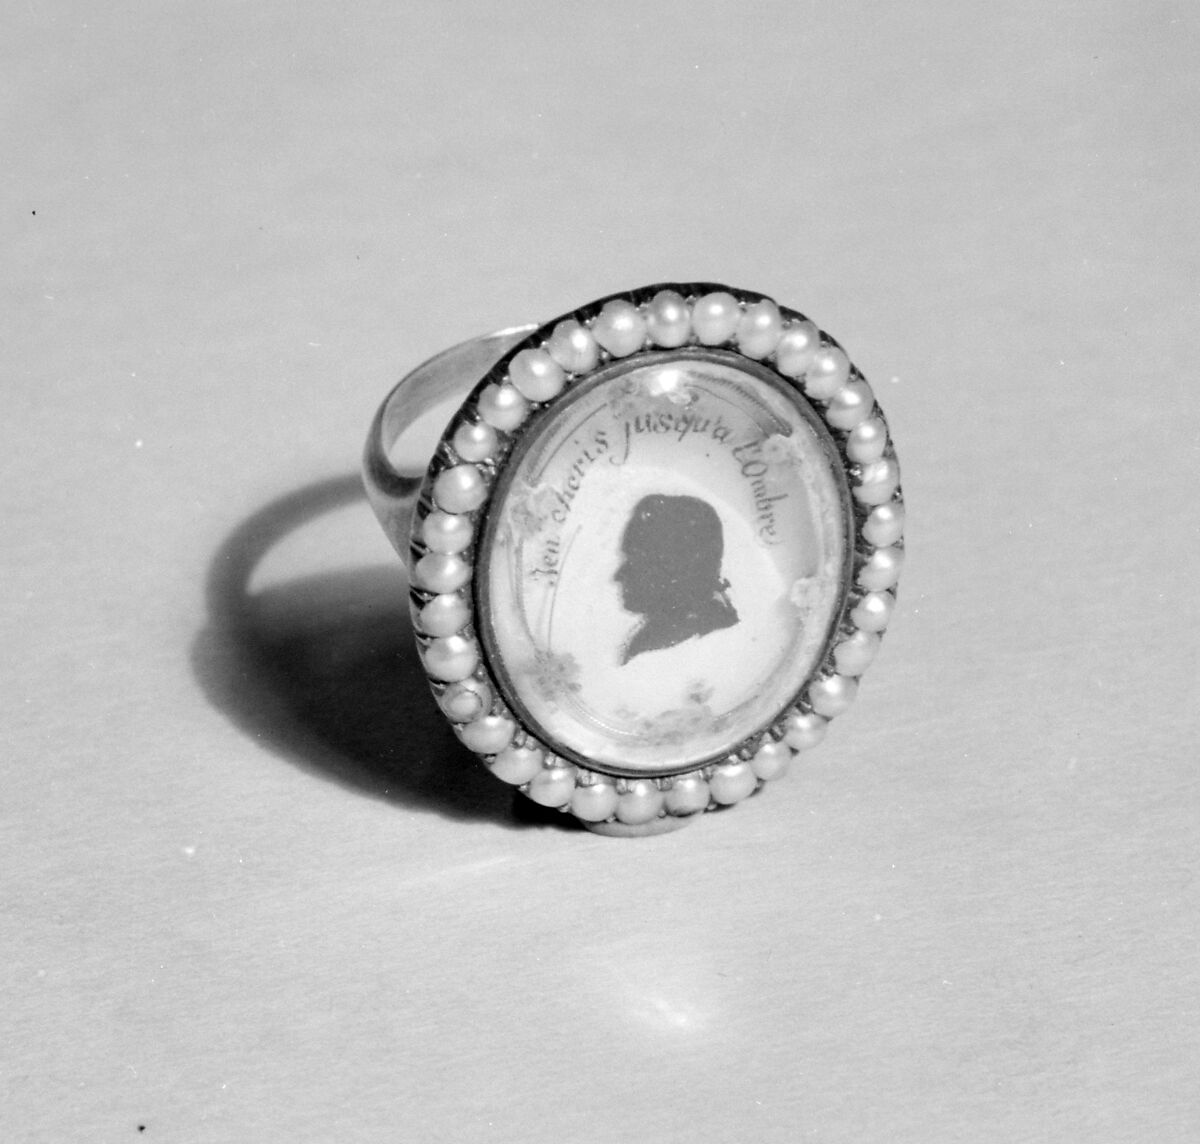 Memorial ring, Gold, pearls, probably British 